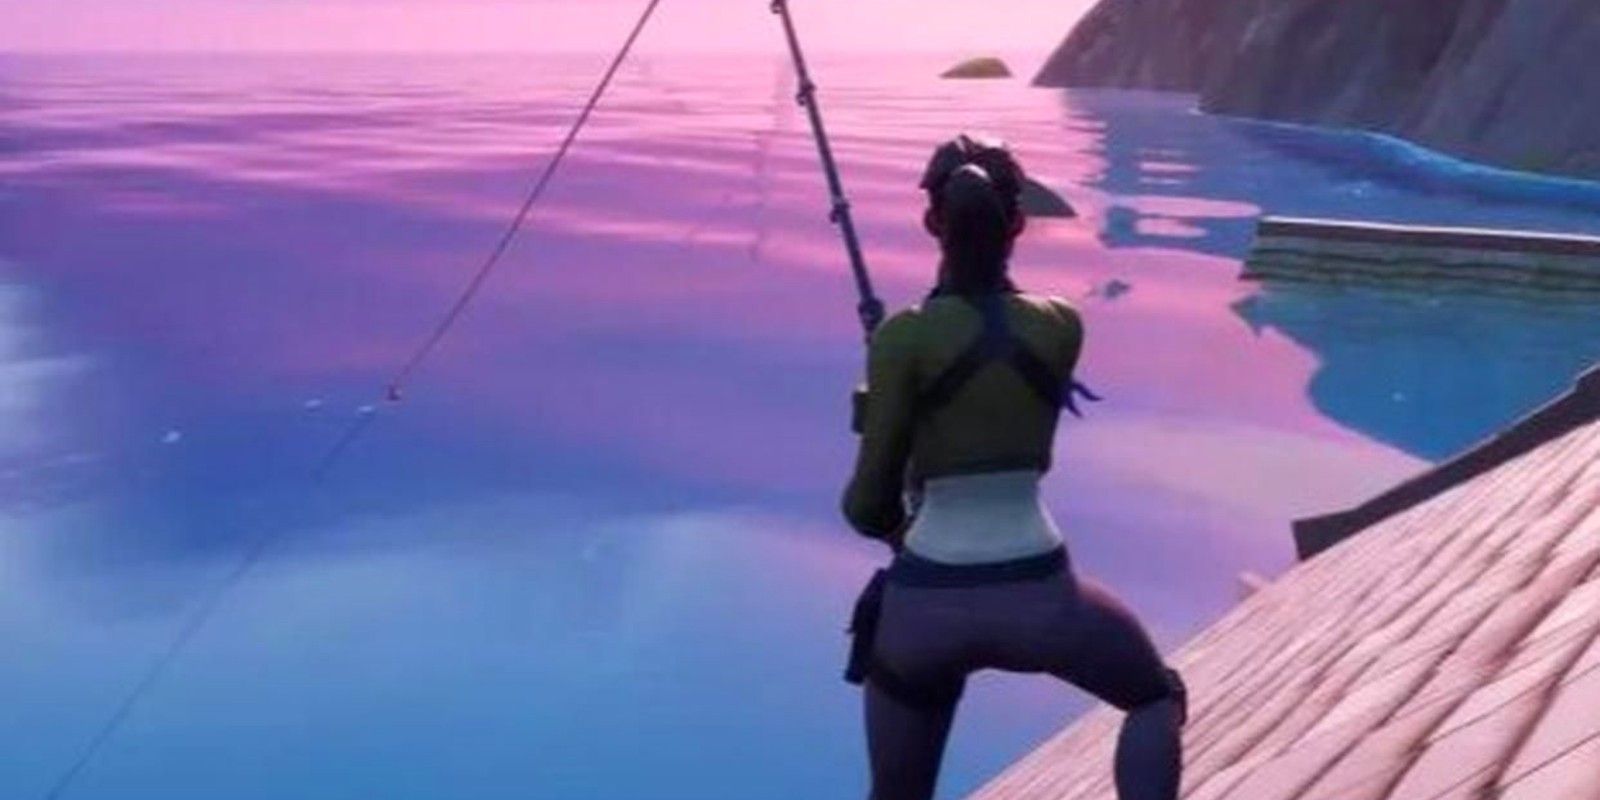 Where to Find Legendary Fish in Fortnite